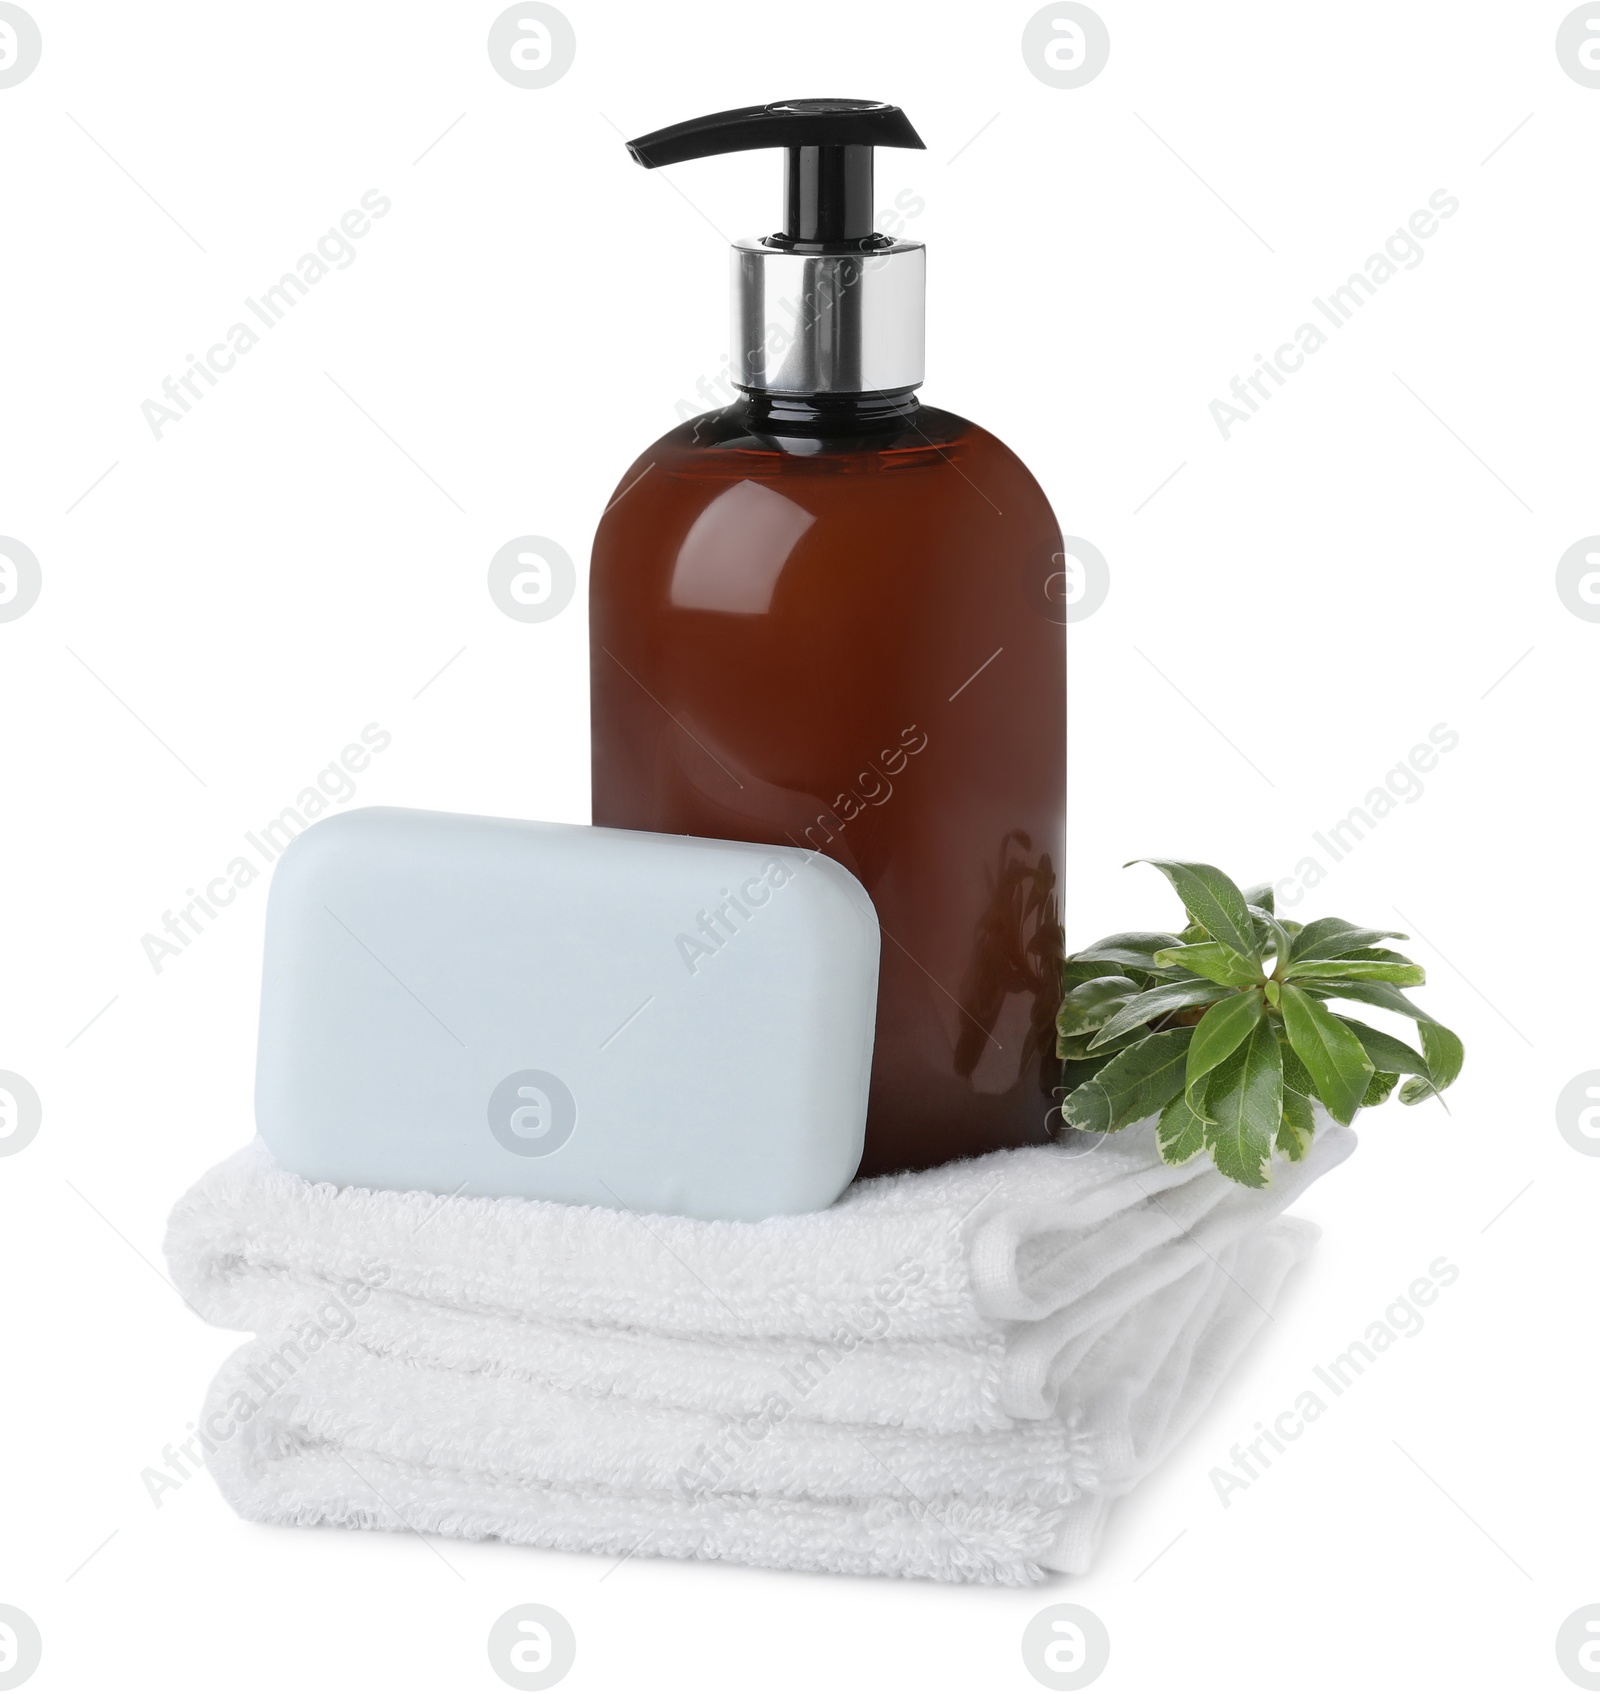 Photo of Soap bar, dispenser and stack of terry towels on white background